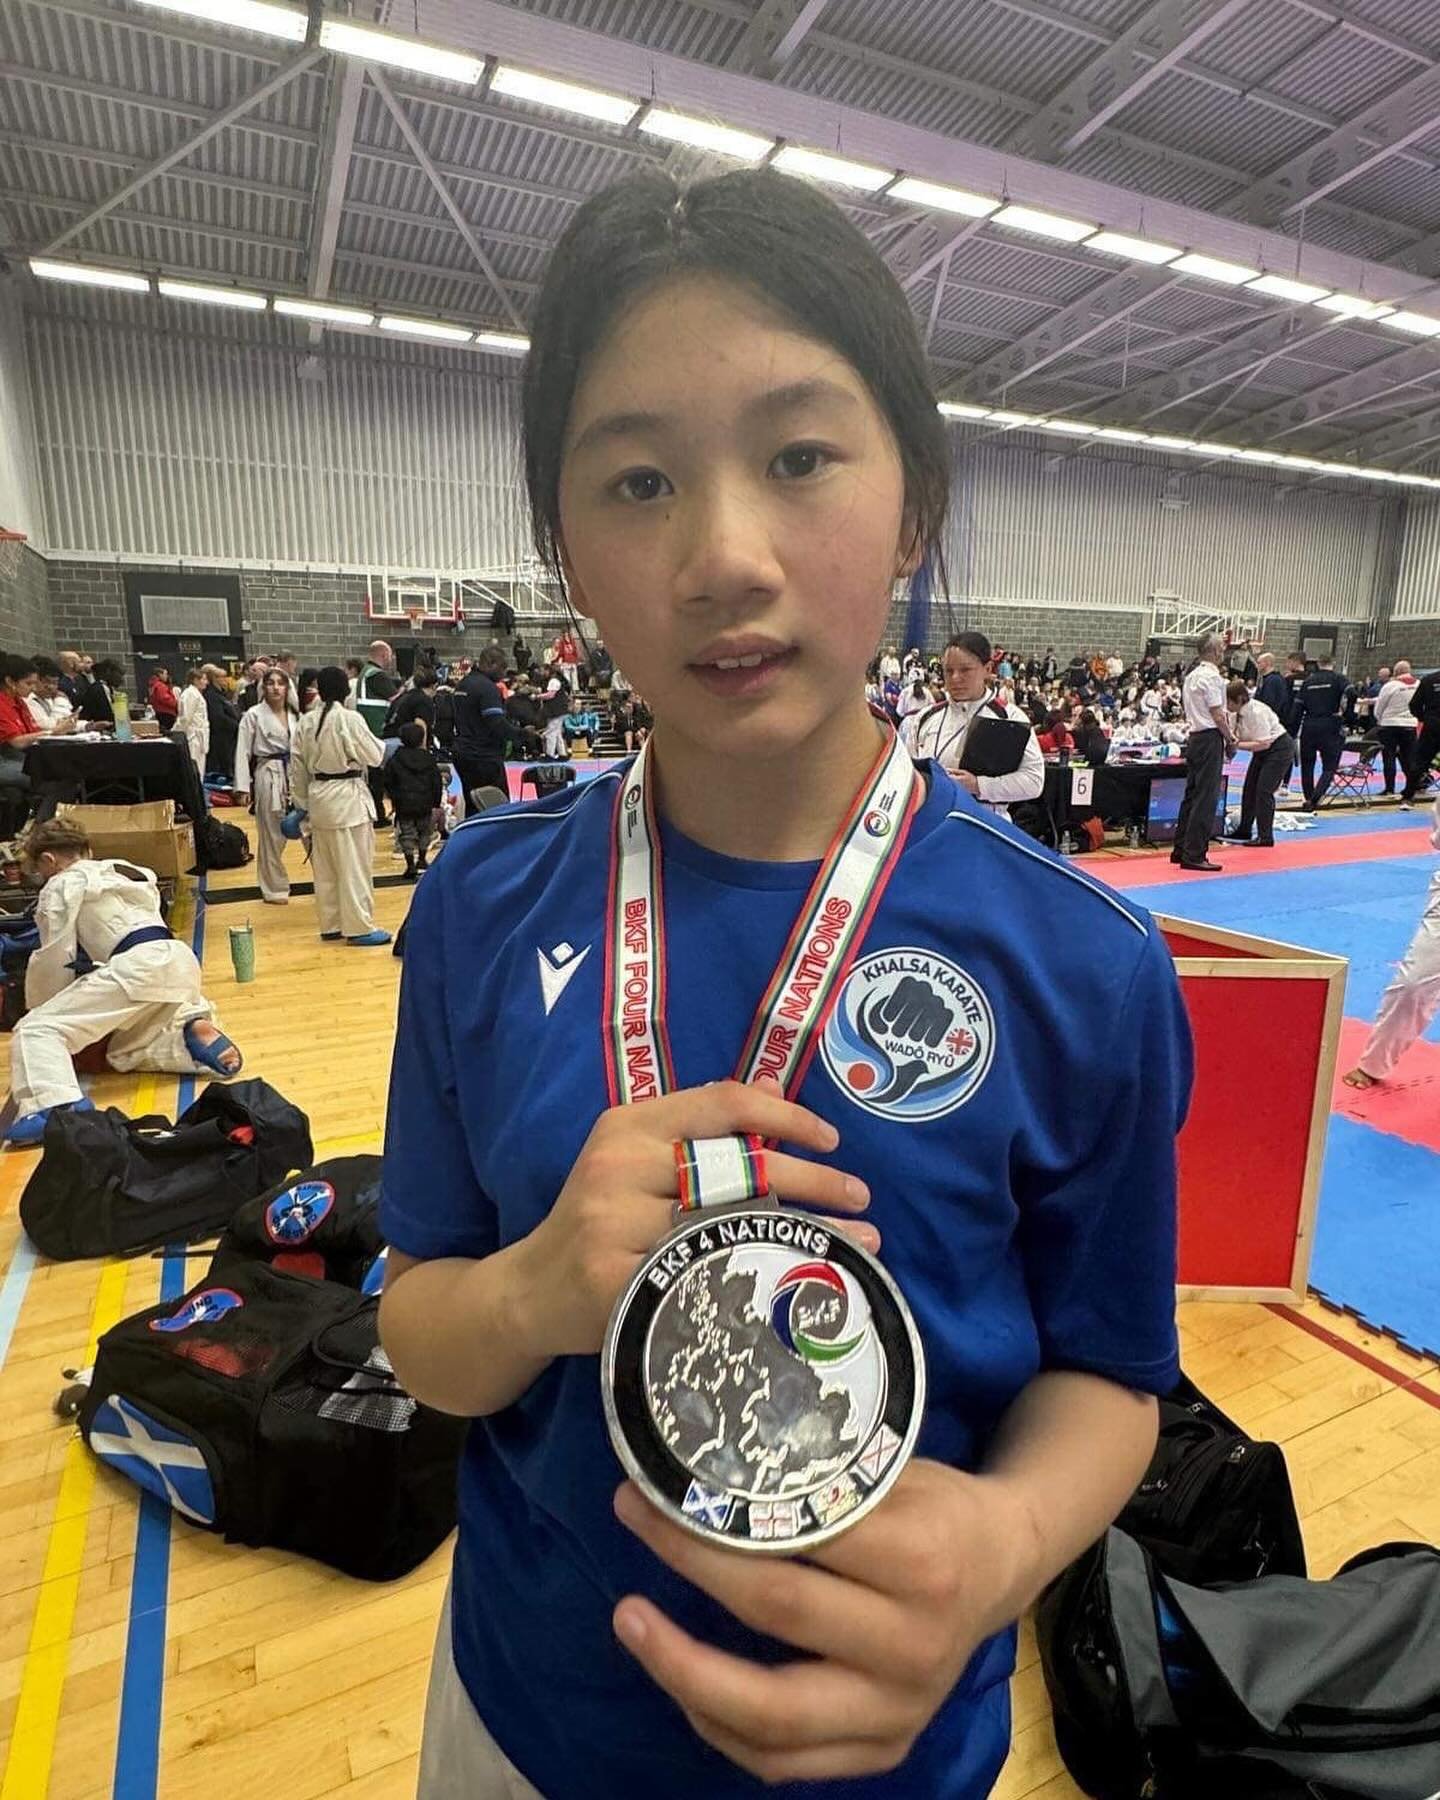 Huge congratulations to Mia-May L from 7E on her stellar performance at the British Karate Championships in Durham! 🥋🏆 Mia-May fought hard and earned a silver medal in her category. We are so proud of her dedication and skill!

Let&rsquo;s cheer fo